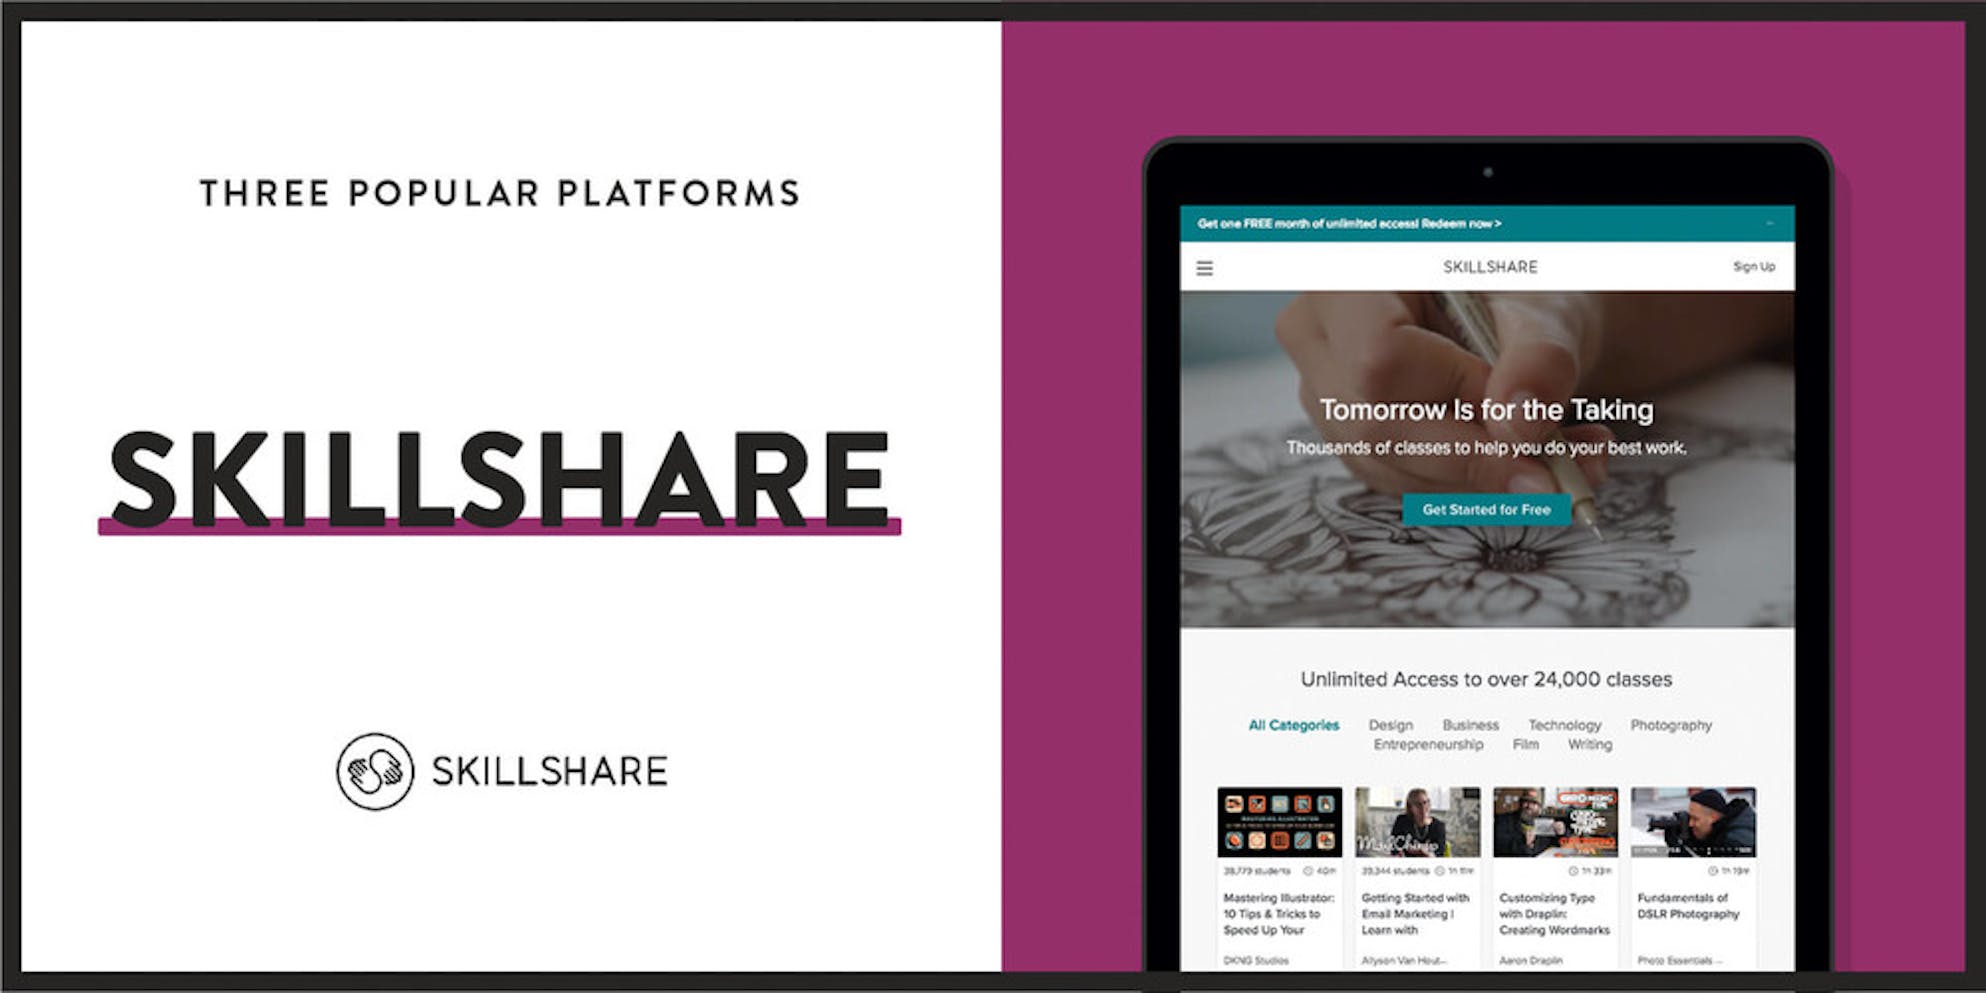 Skillshare is a popular online course marketplace